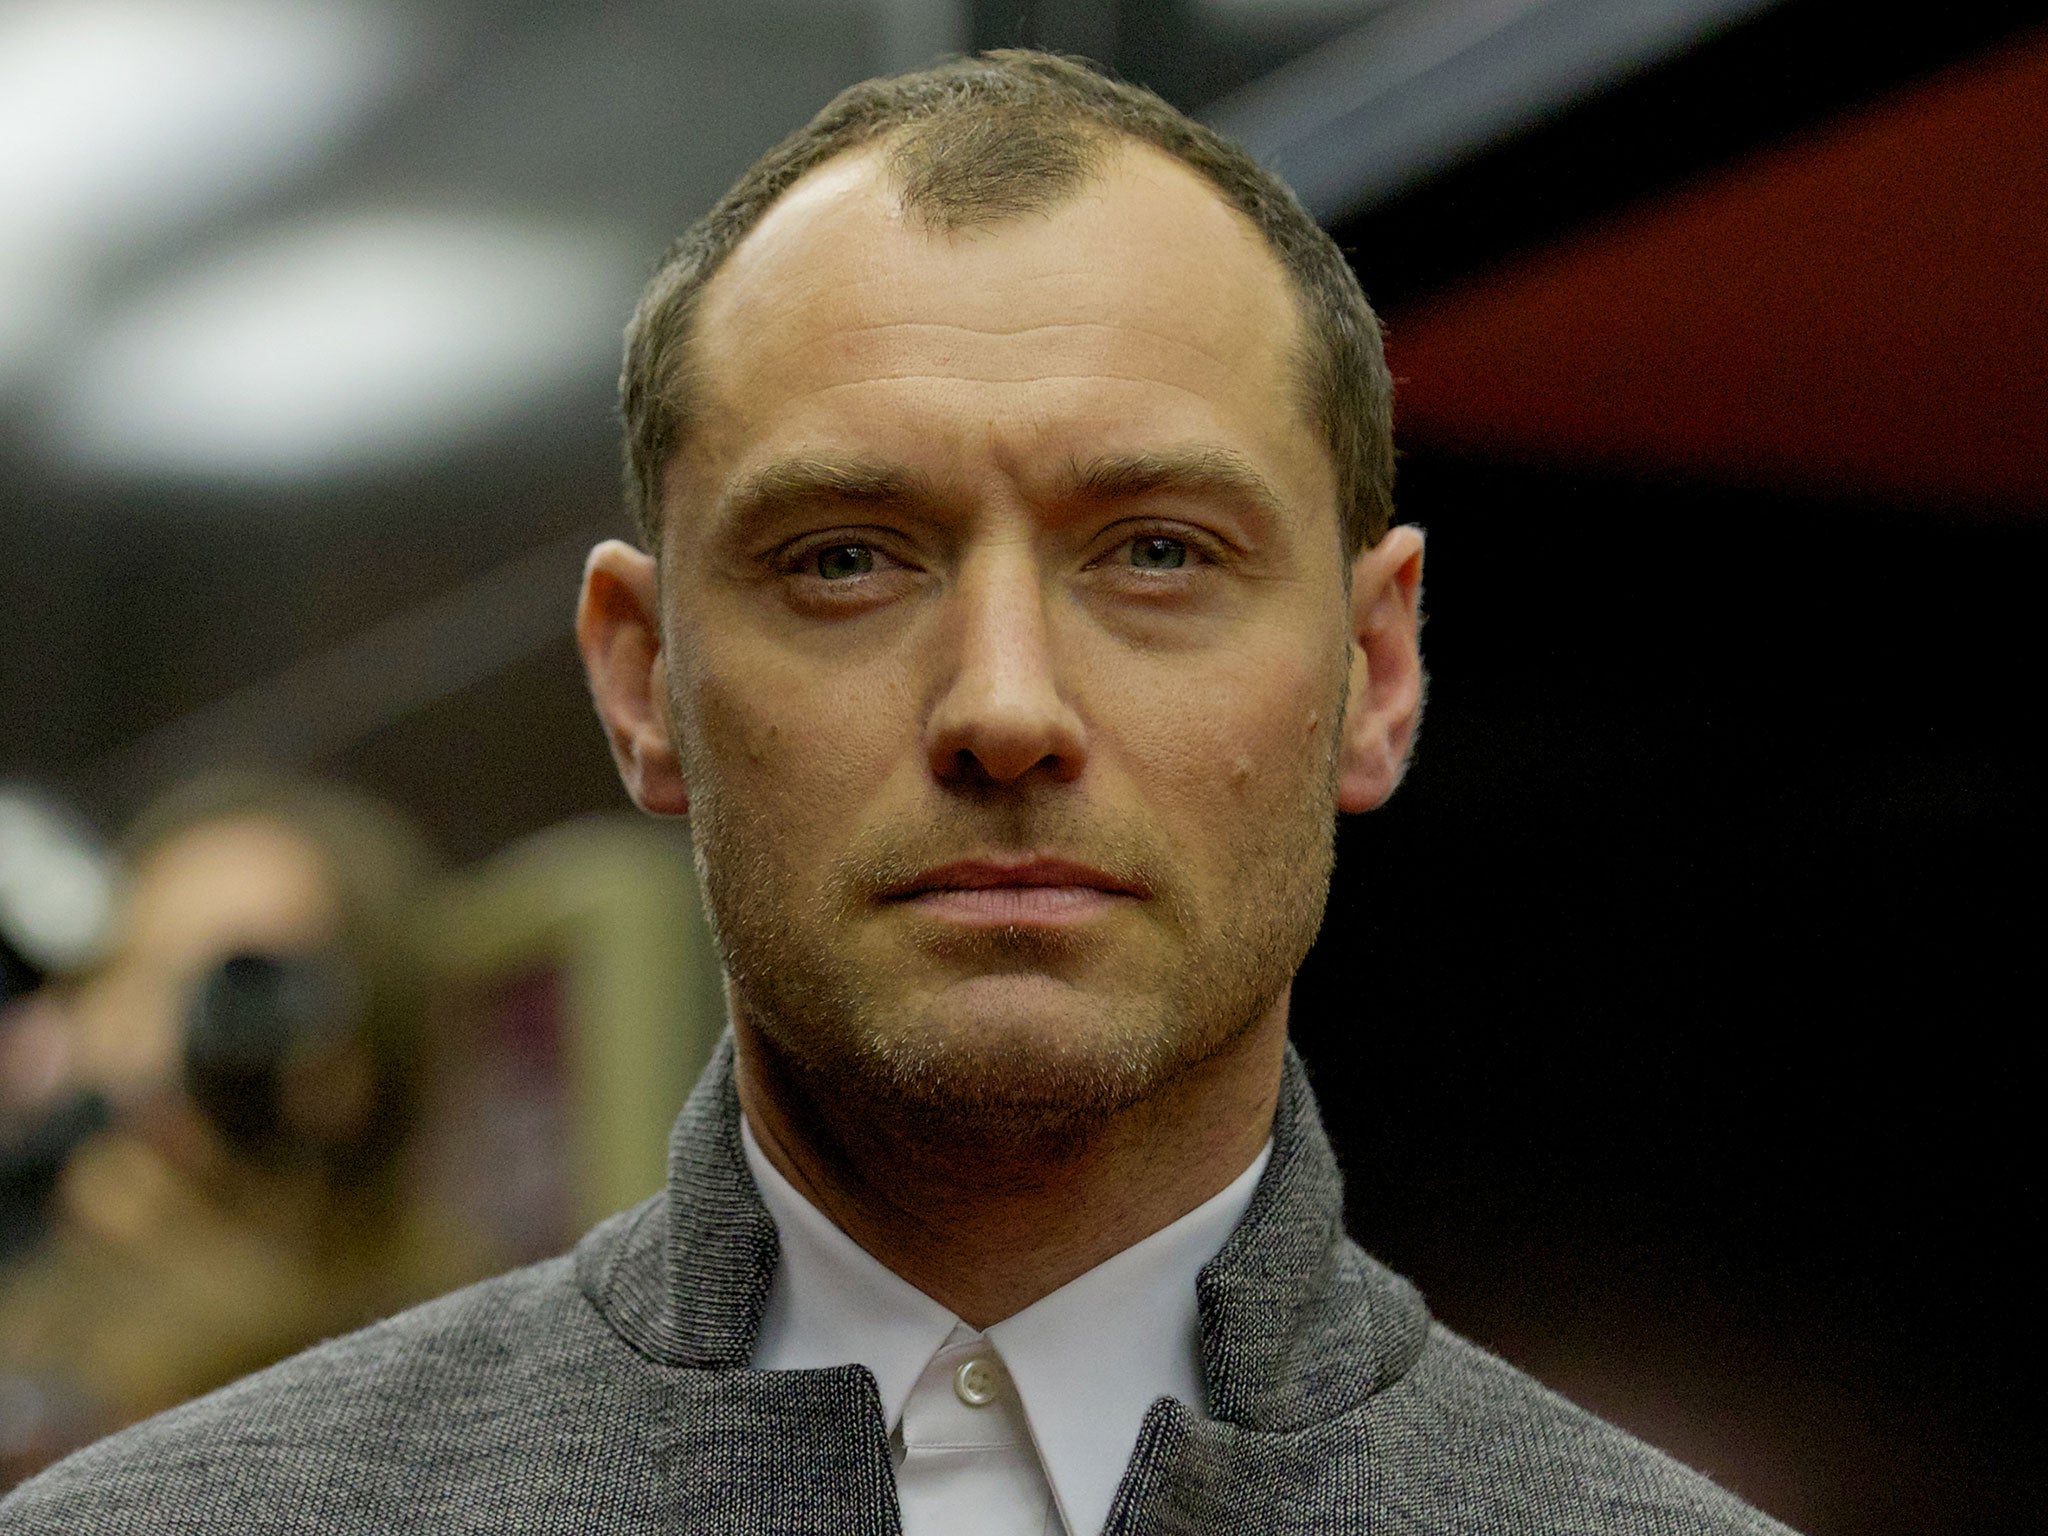 Jude Law starred in The Holiday with Cameron Diaz